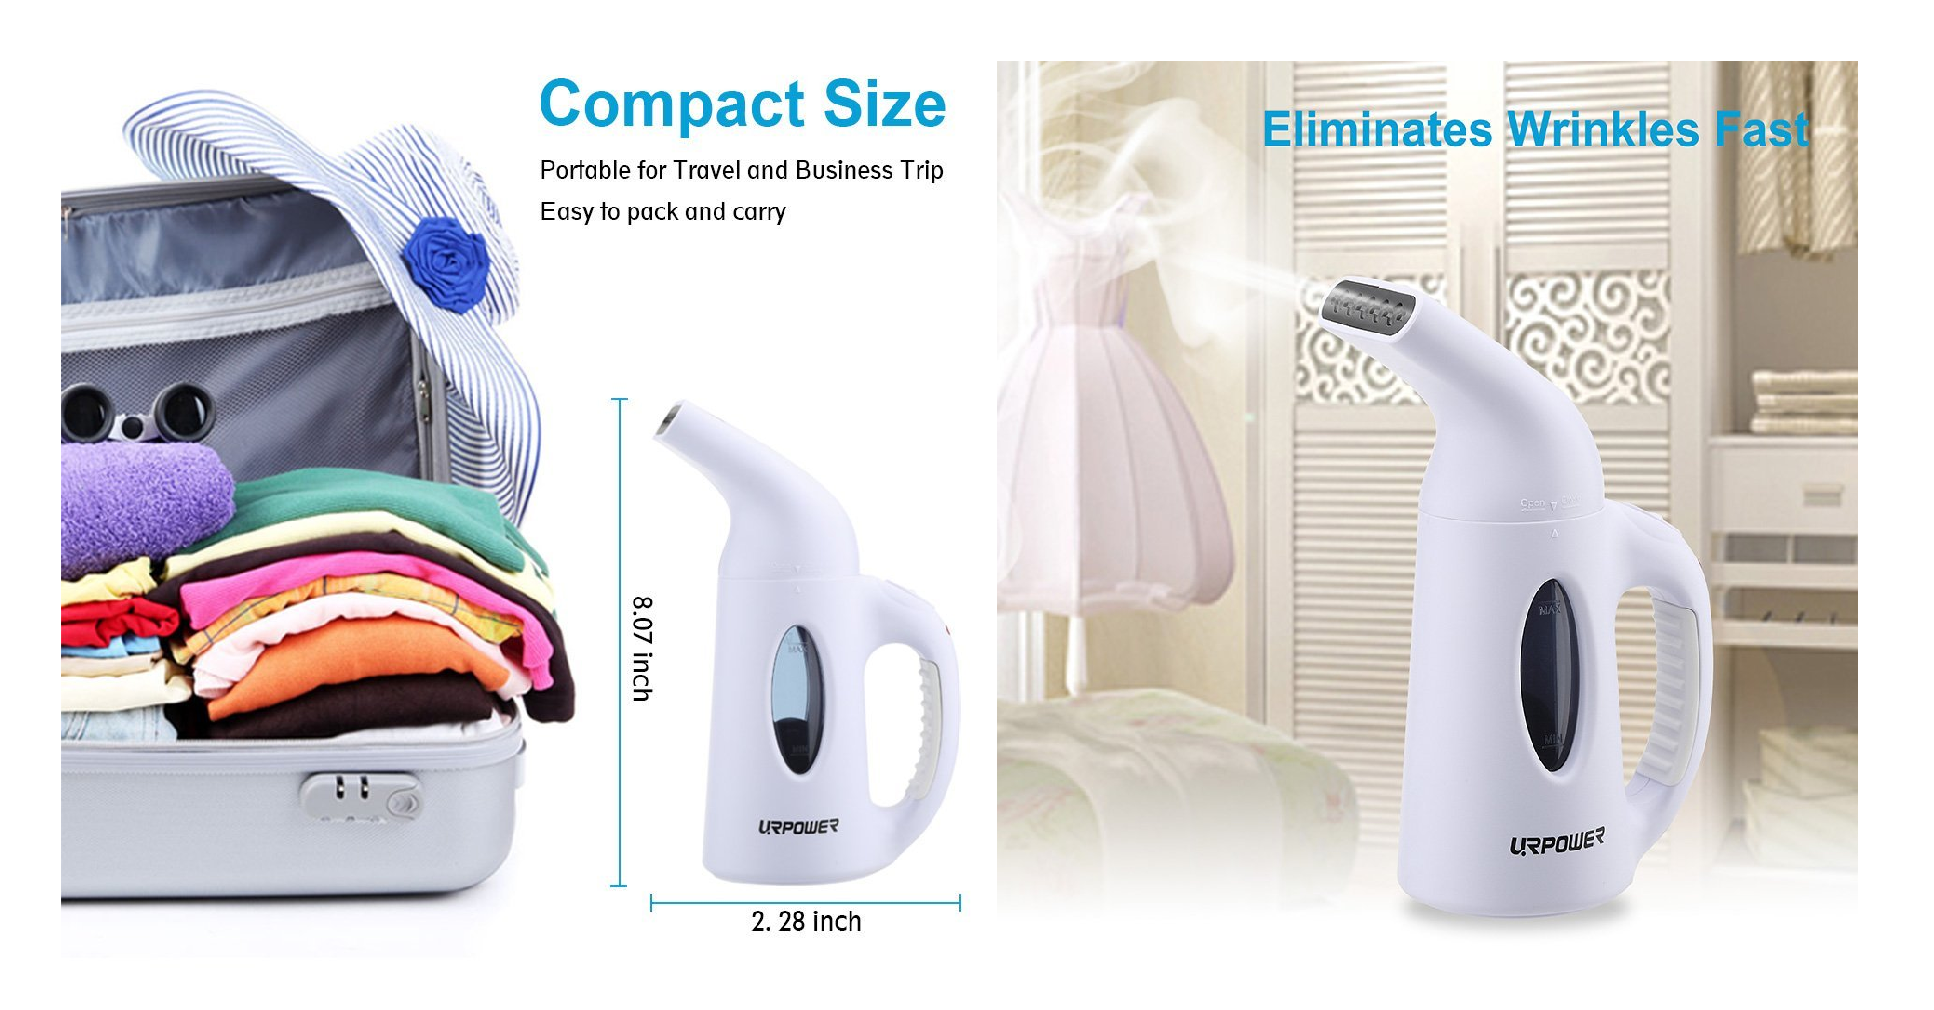 Highly Rate Portable Handheld Steamer Only $18.99 on Amazon!